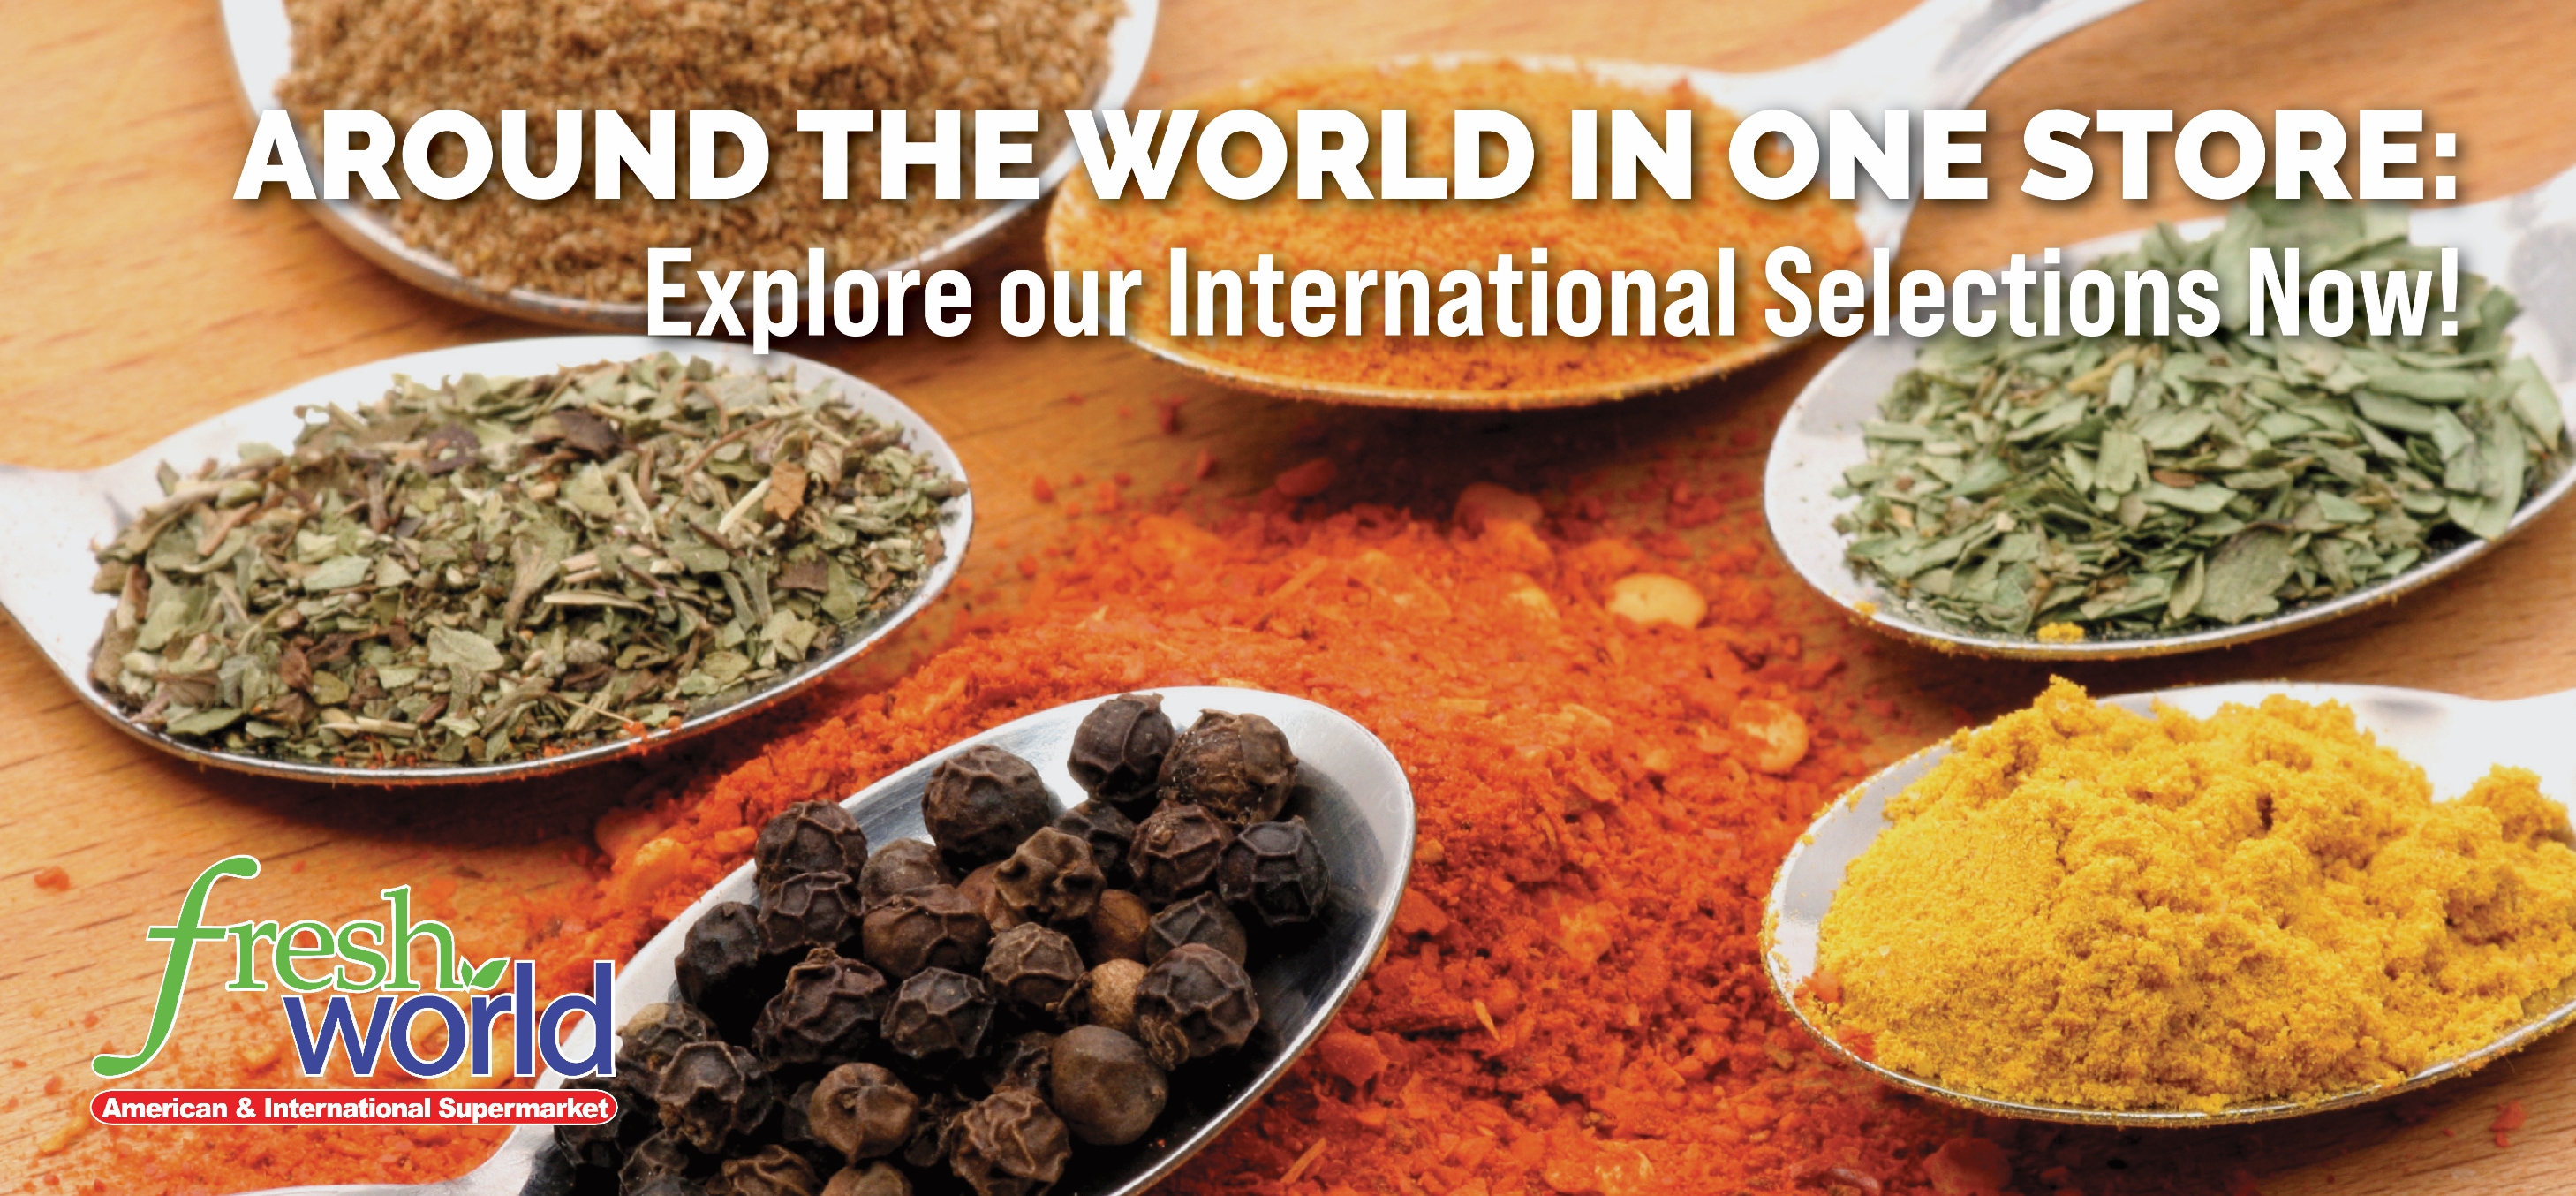 AROUND THE WORLD IN ONE STORE: Explore our International Selections Now!